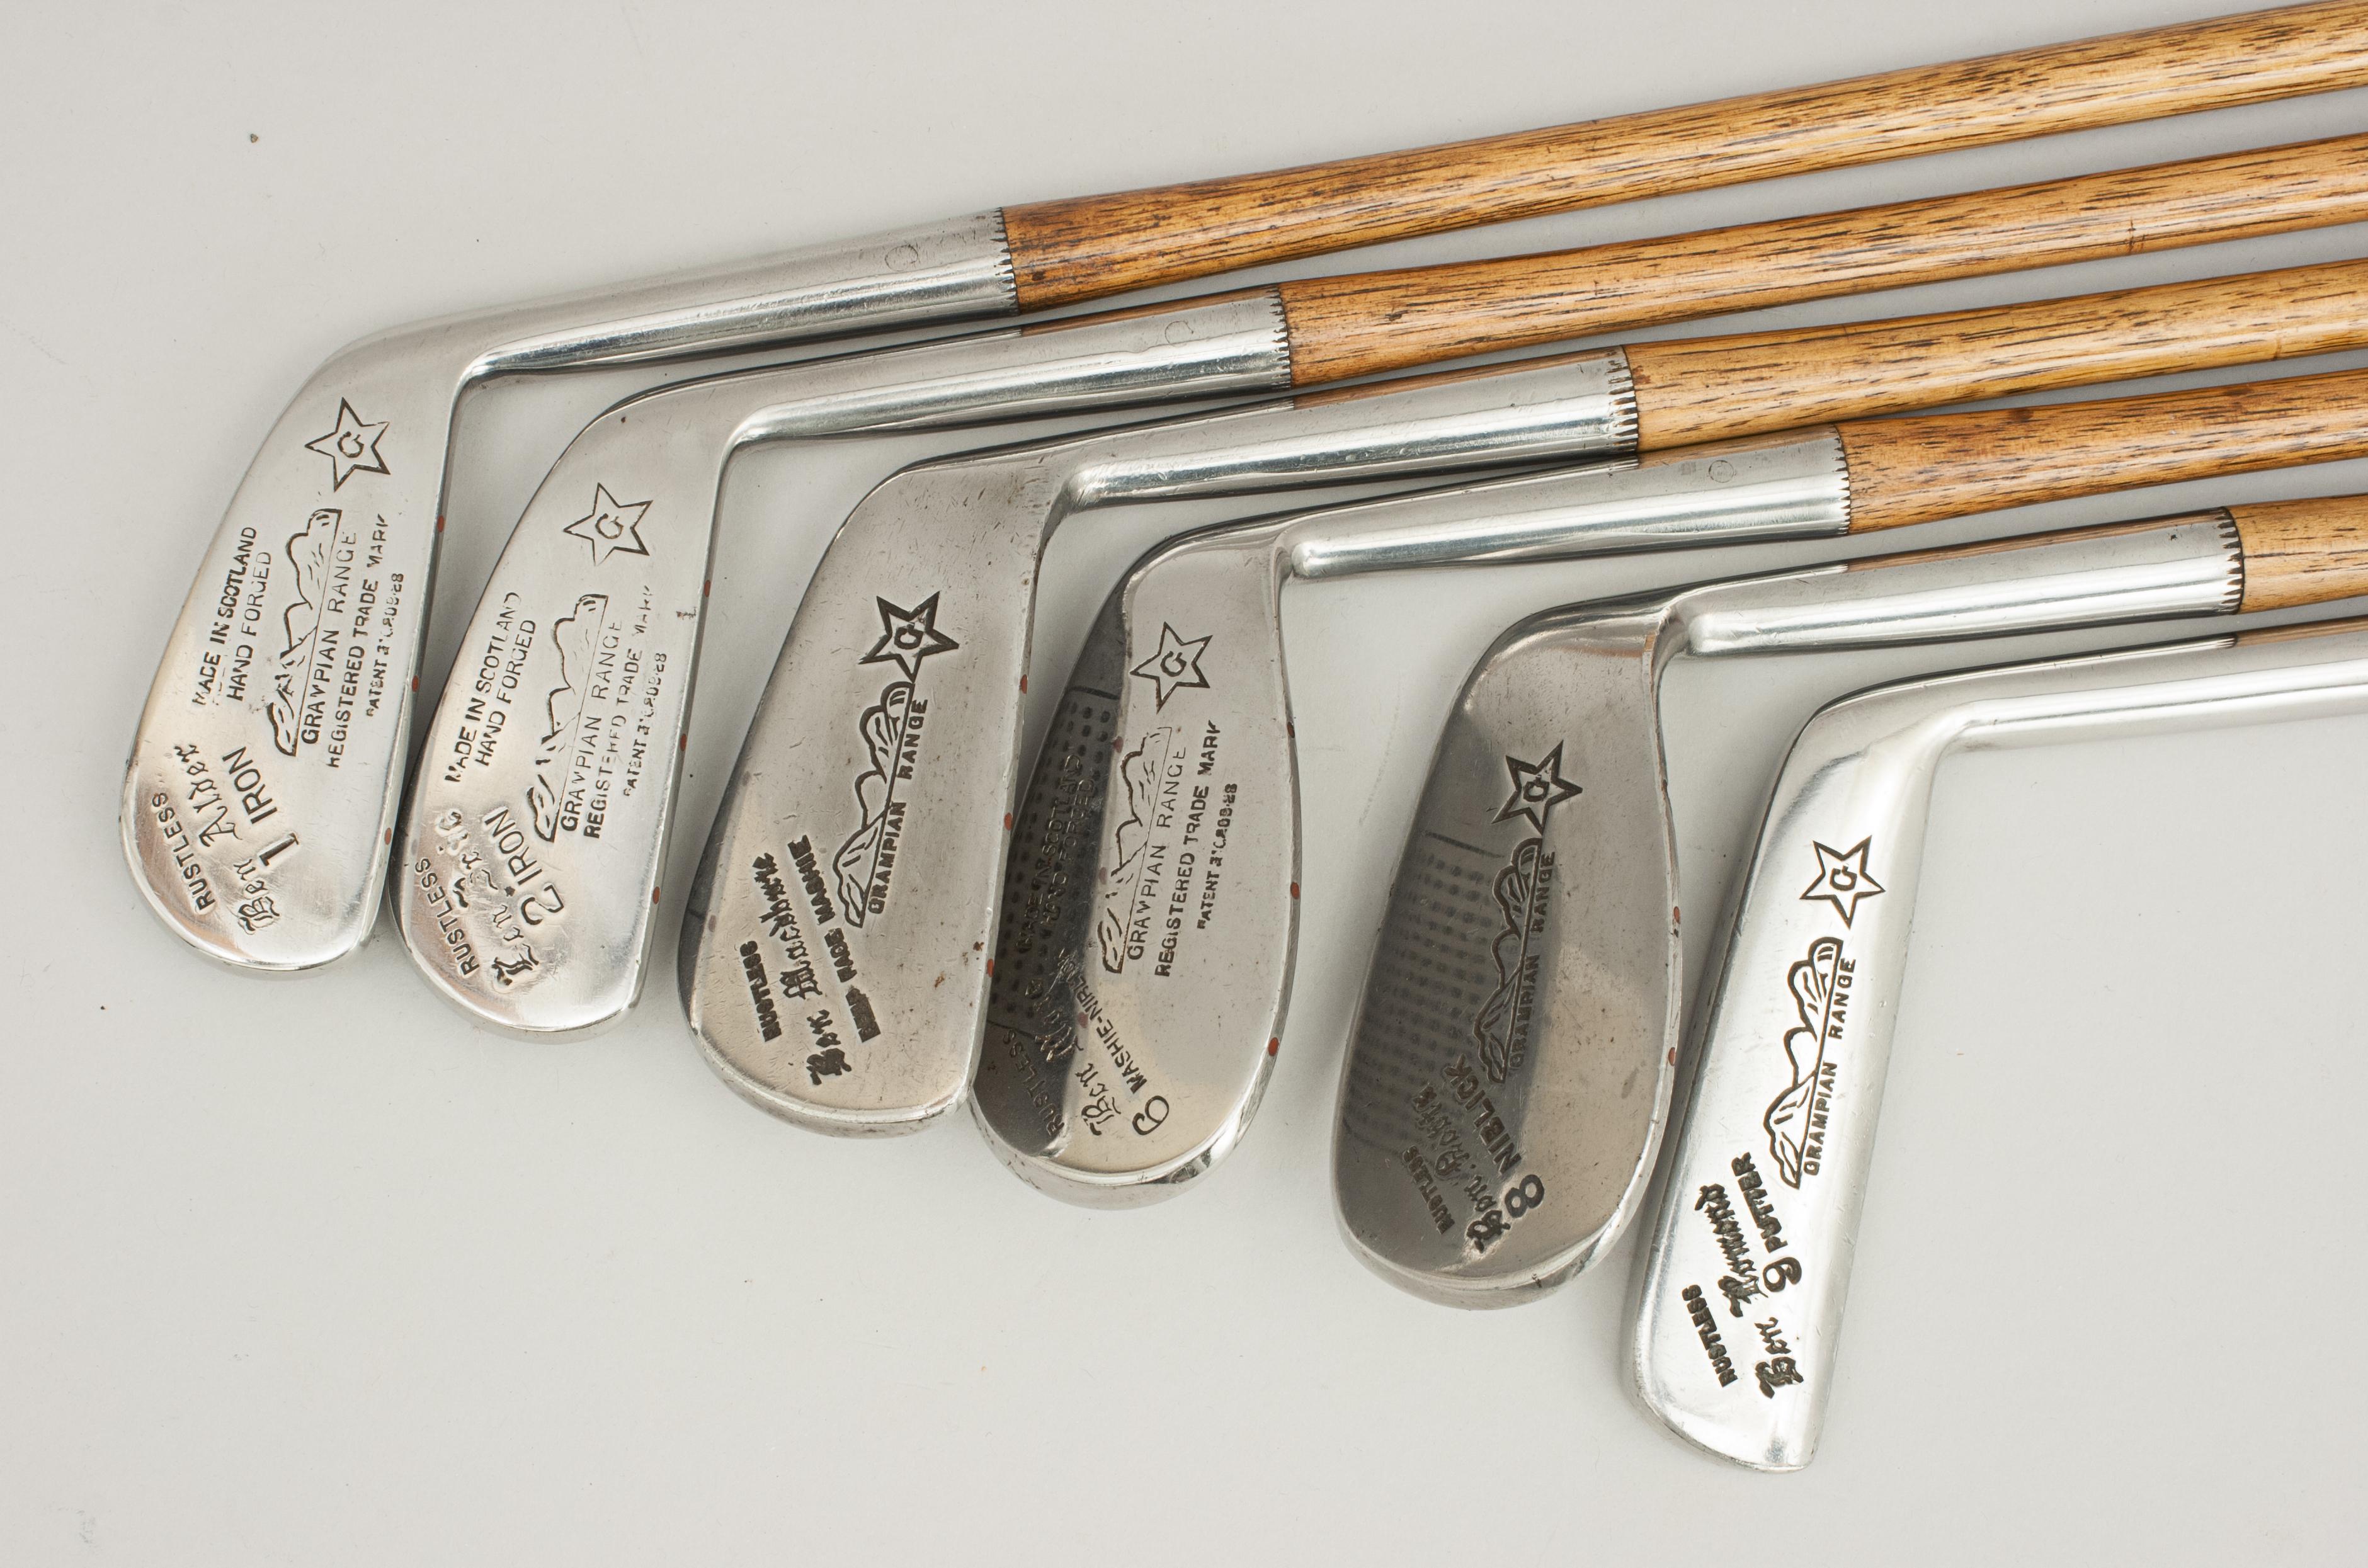 Hickory Set of Vintage Golf Clubs by Gibson of Kinghorn, Scotland